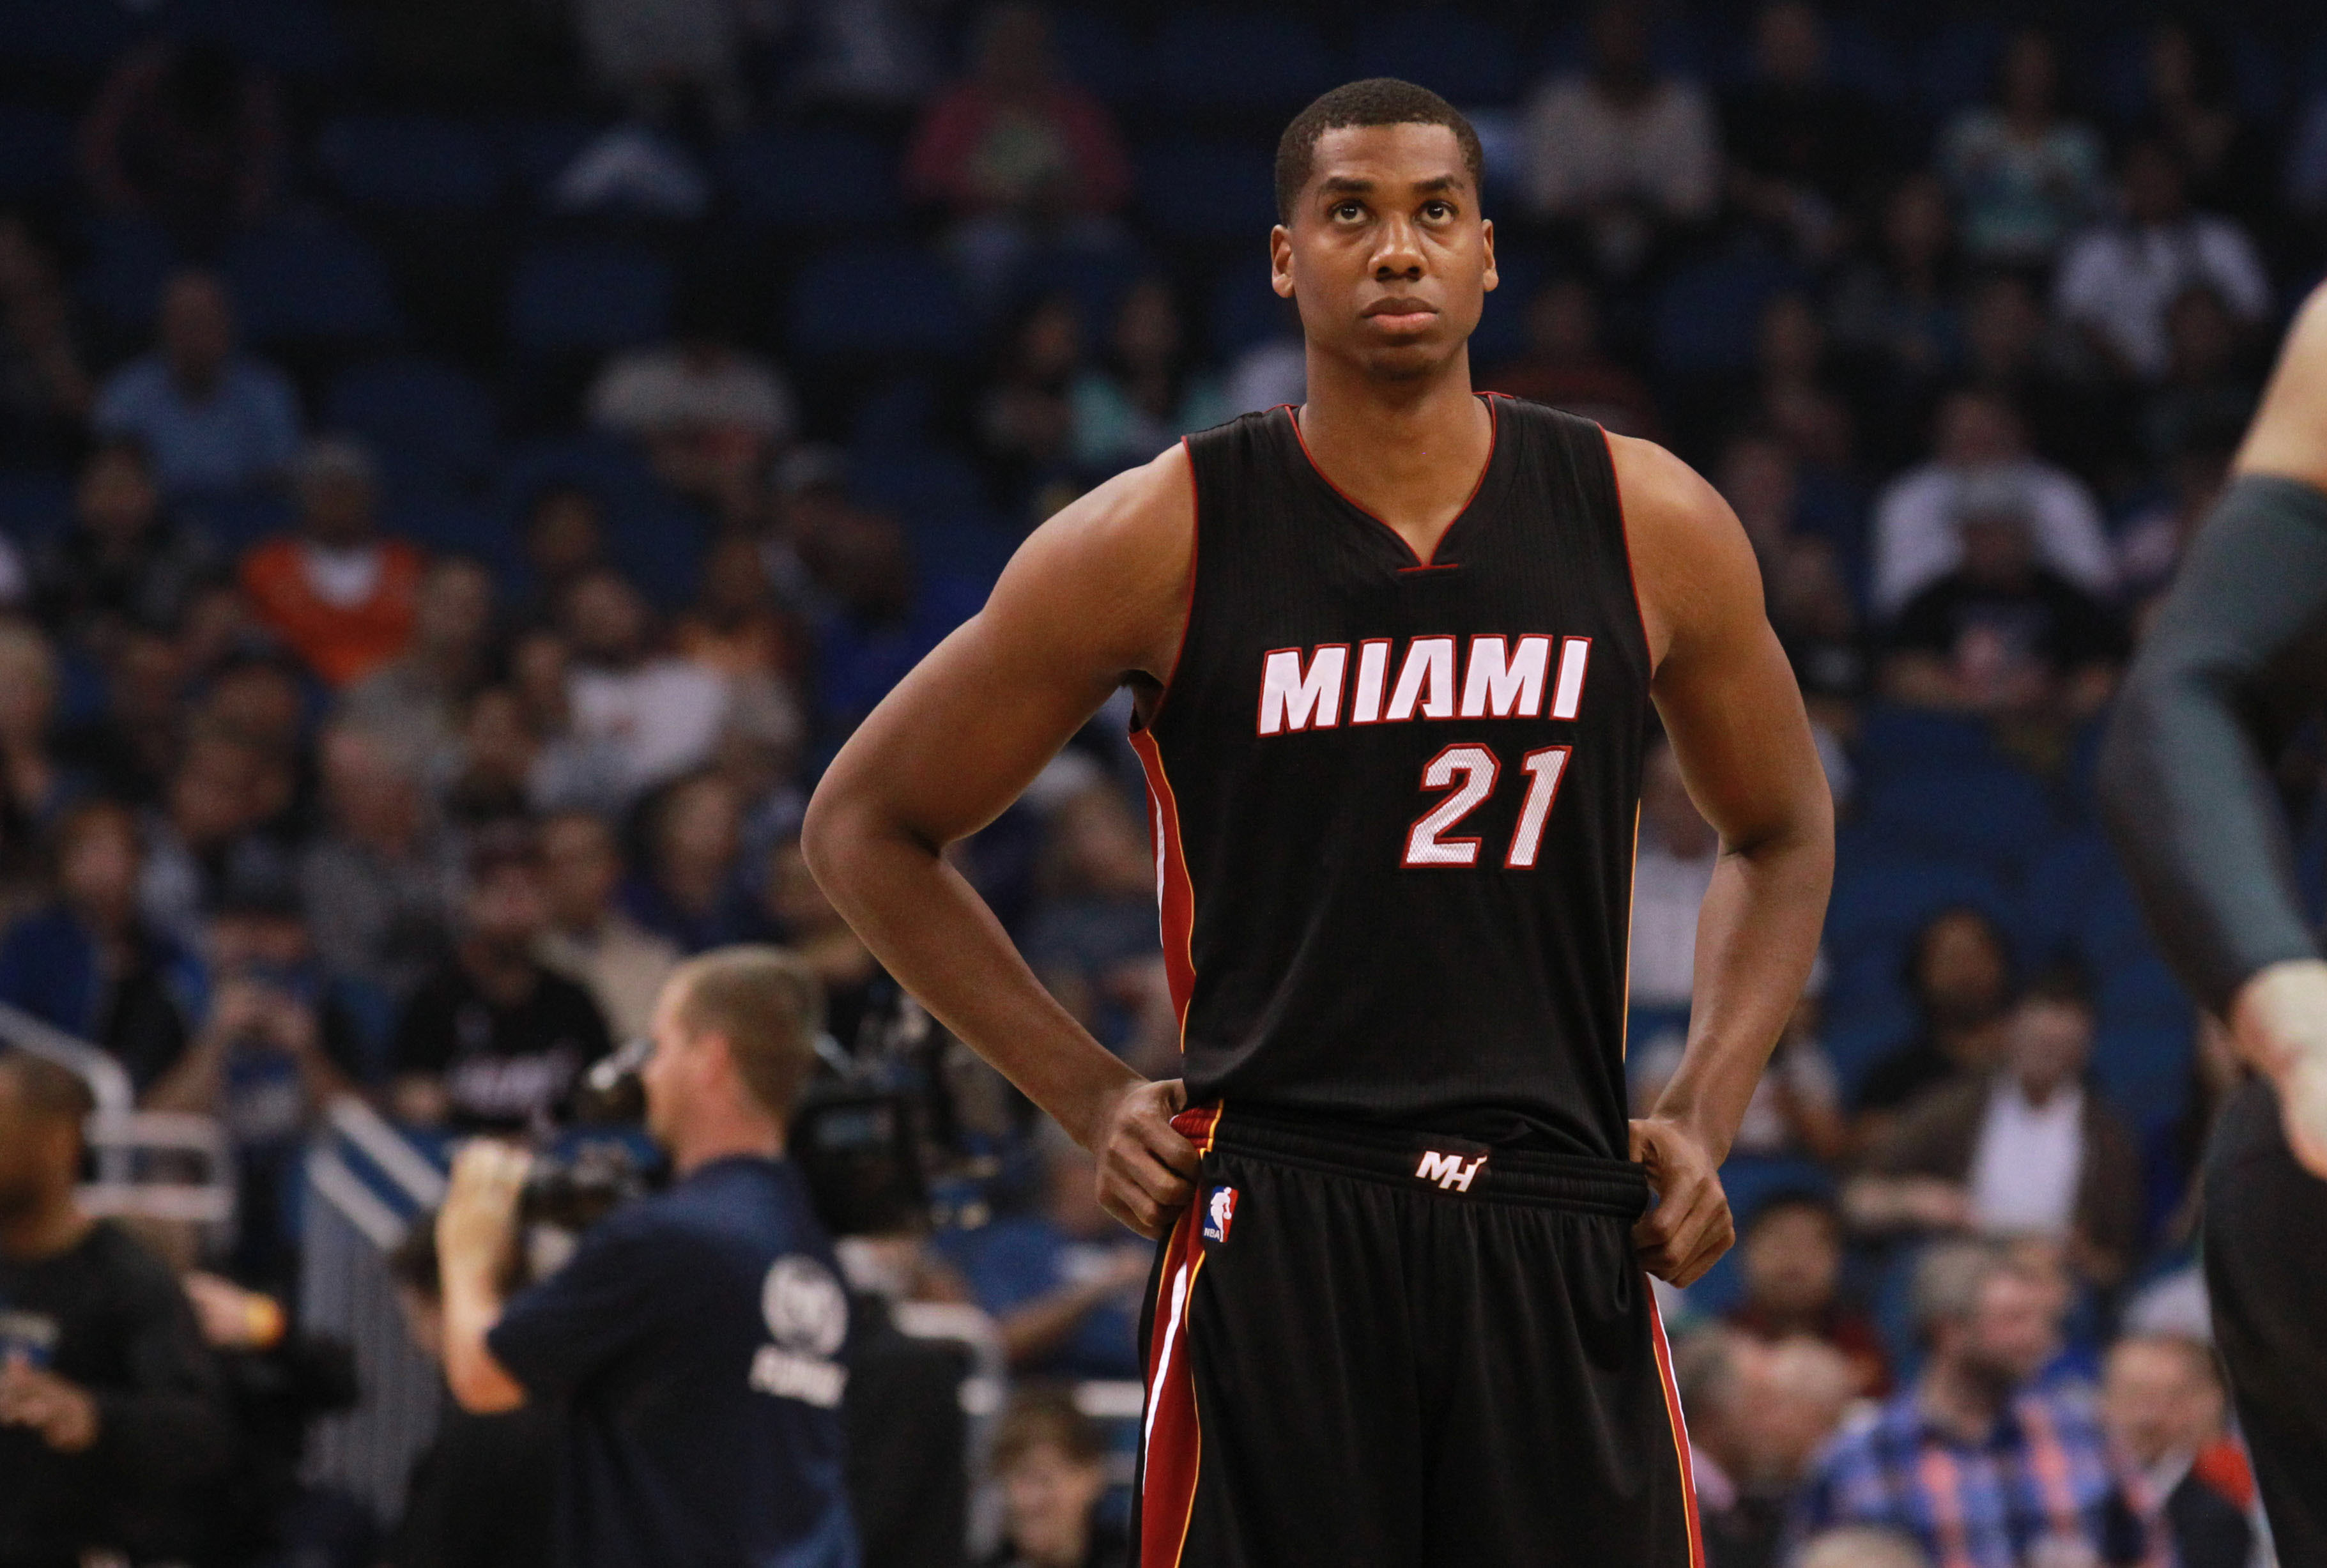 Hassan Whiteside’s Next Contract Projected to be Worth $18.8 Million Per Year